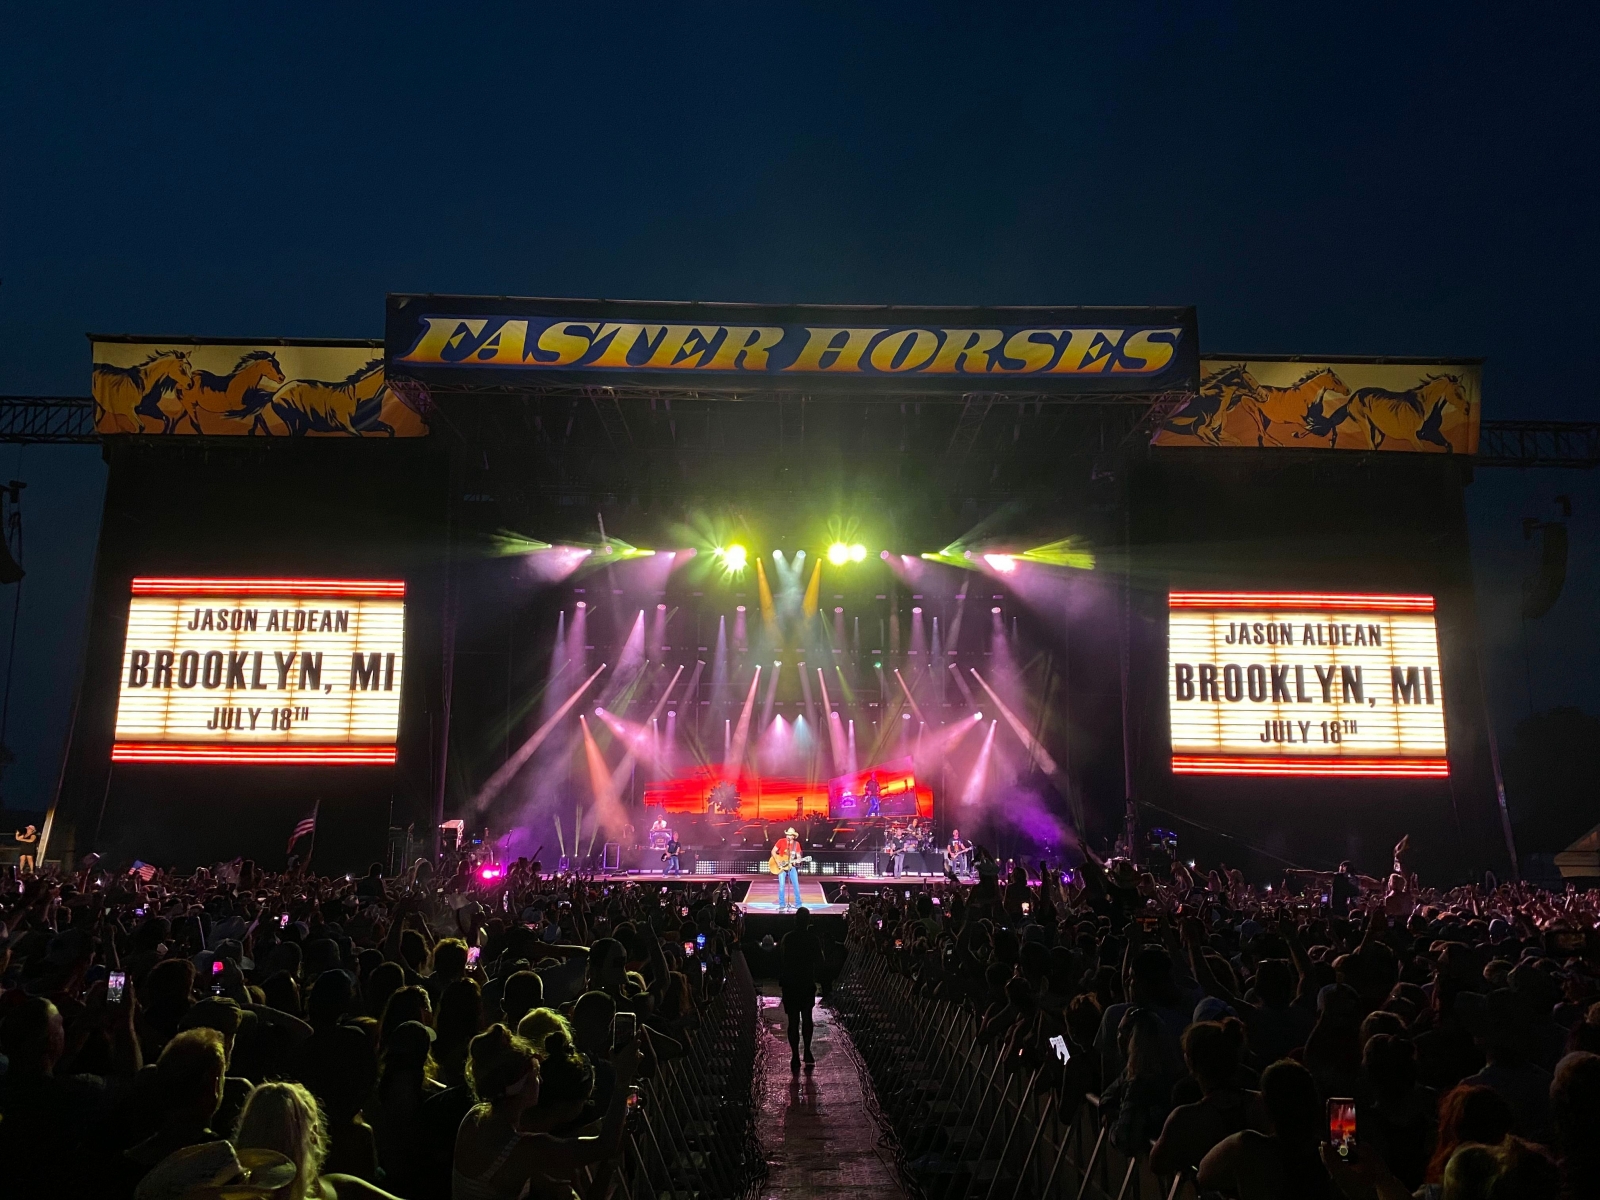 Keith Hoagland Thinks Big For Jason Aldean’s Faster Horses Festival Appearance